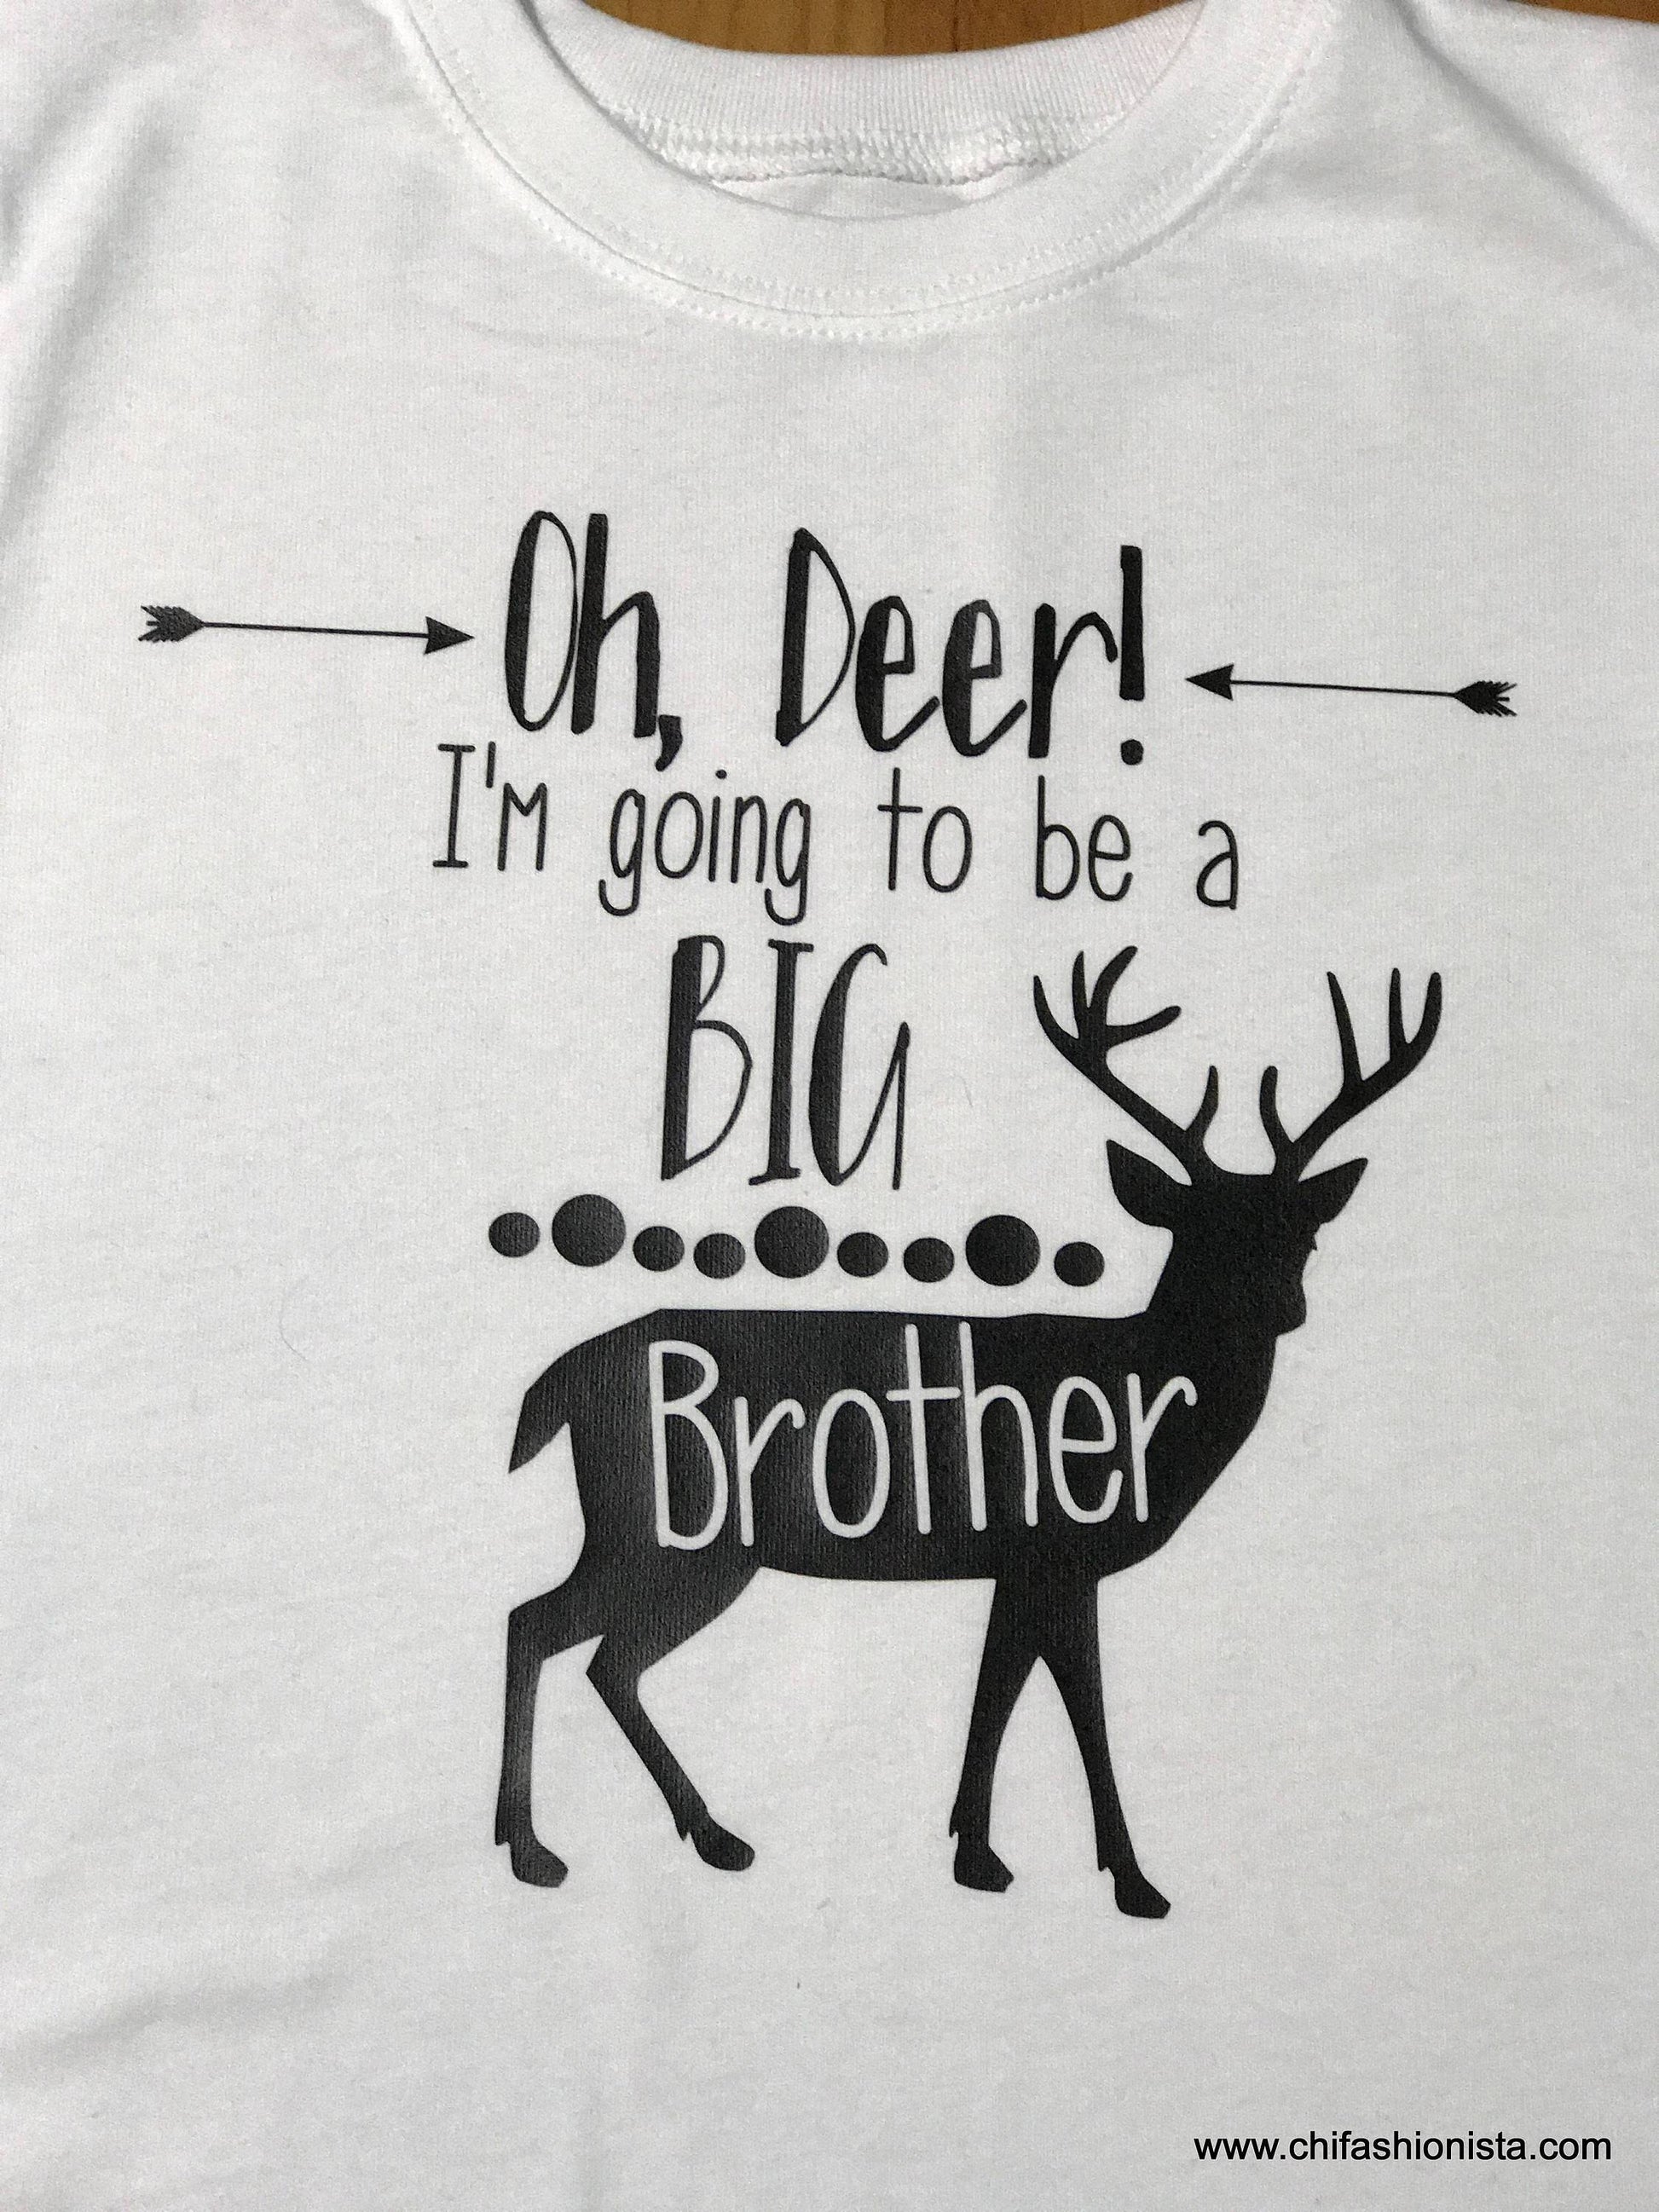 Handcrafted Children's Clothing, Clothing for Children and Parents, Oh Deer, I'm Going to Be a Big Brother- Pregnancy Announcement Shirt, chi-fashionista